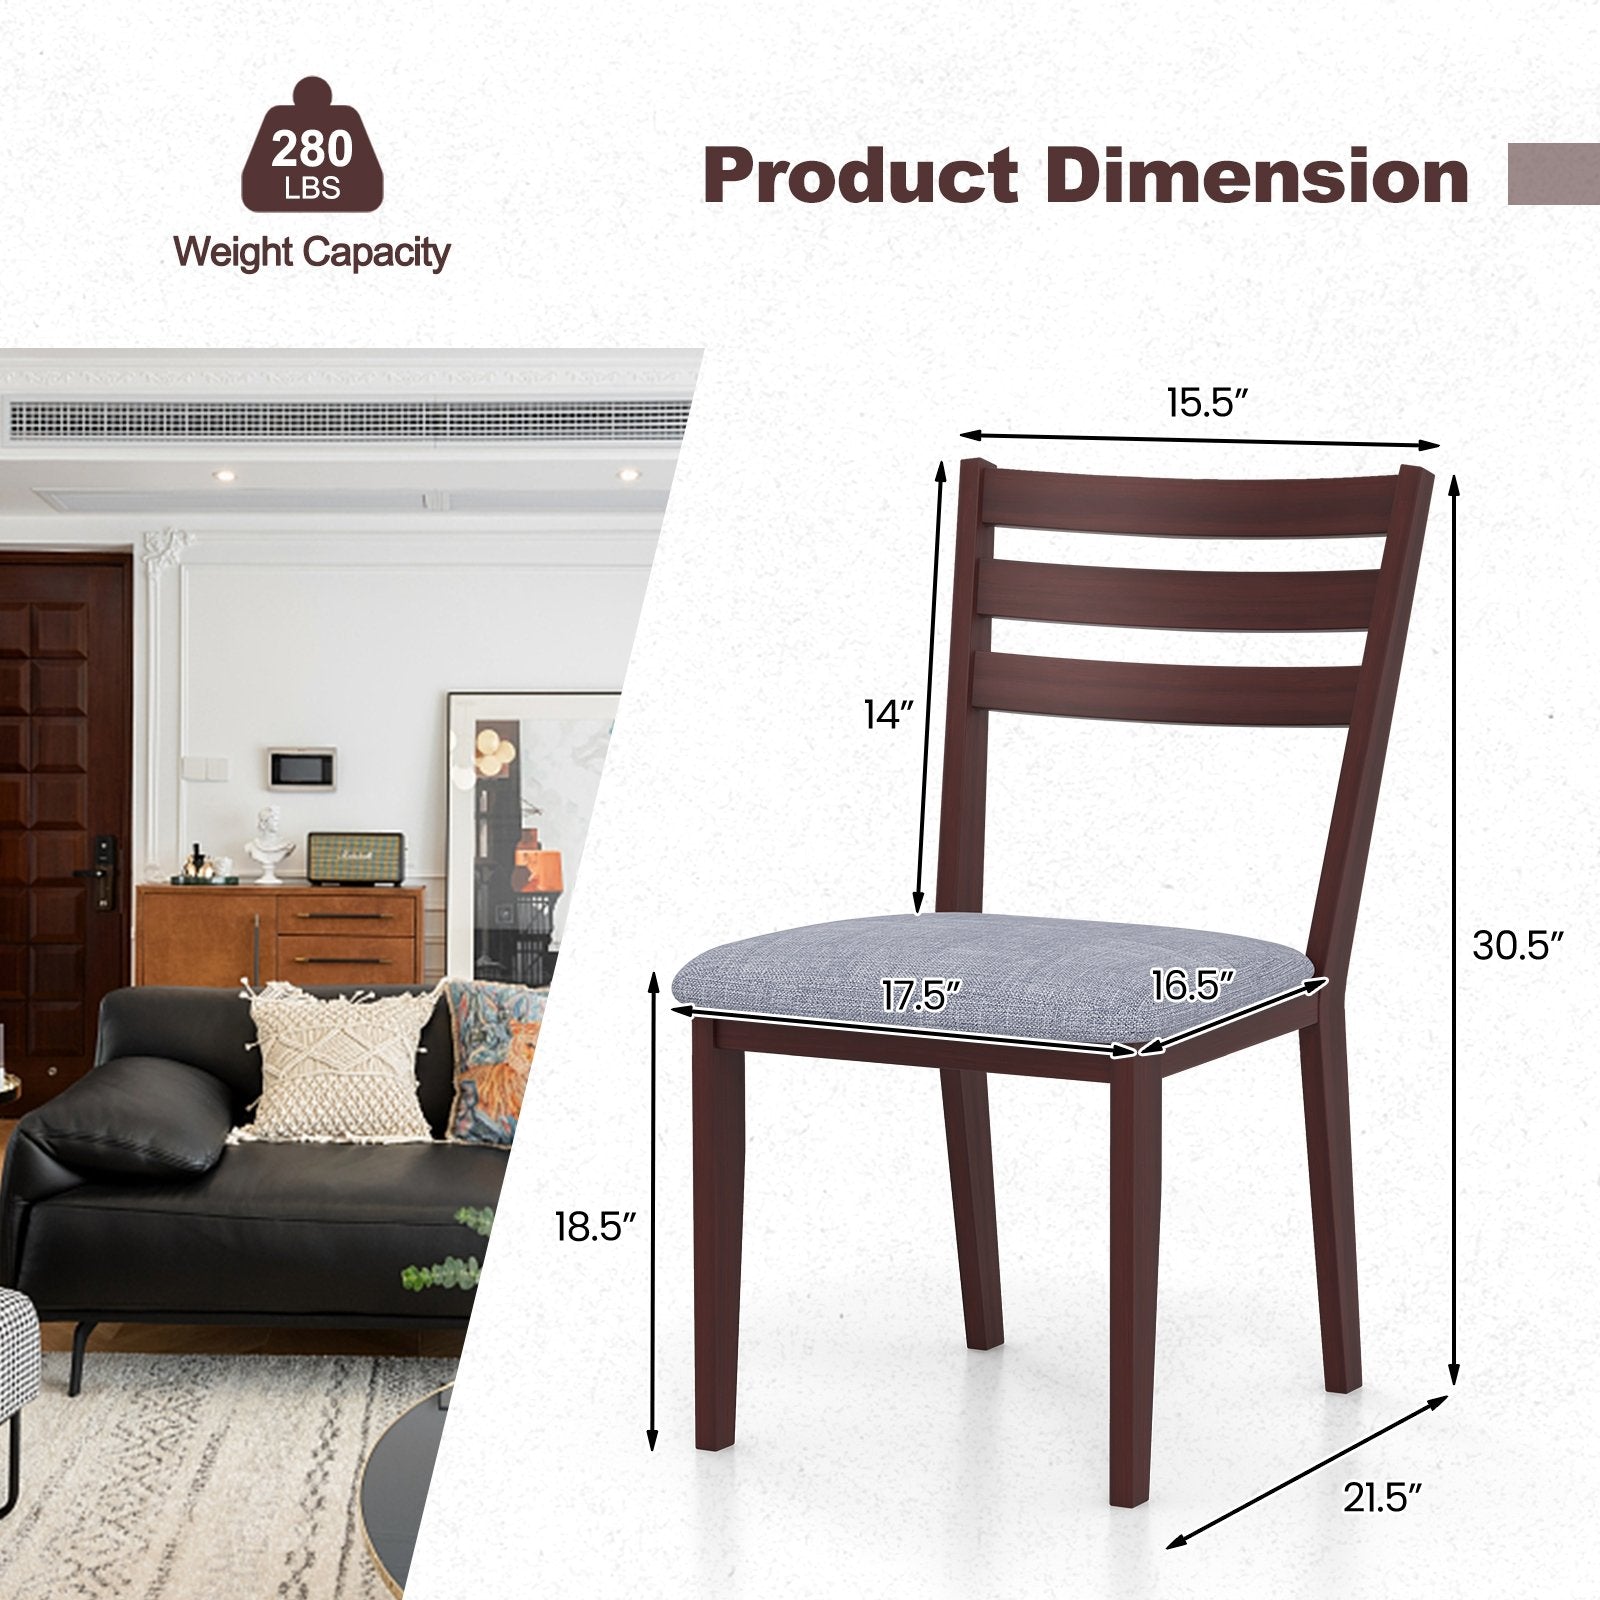 Set of 2 Upholstered Armless Kitchen Chair with Solid Rubber Wood Frame, Coffee - Gallery Canada